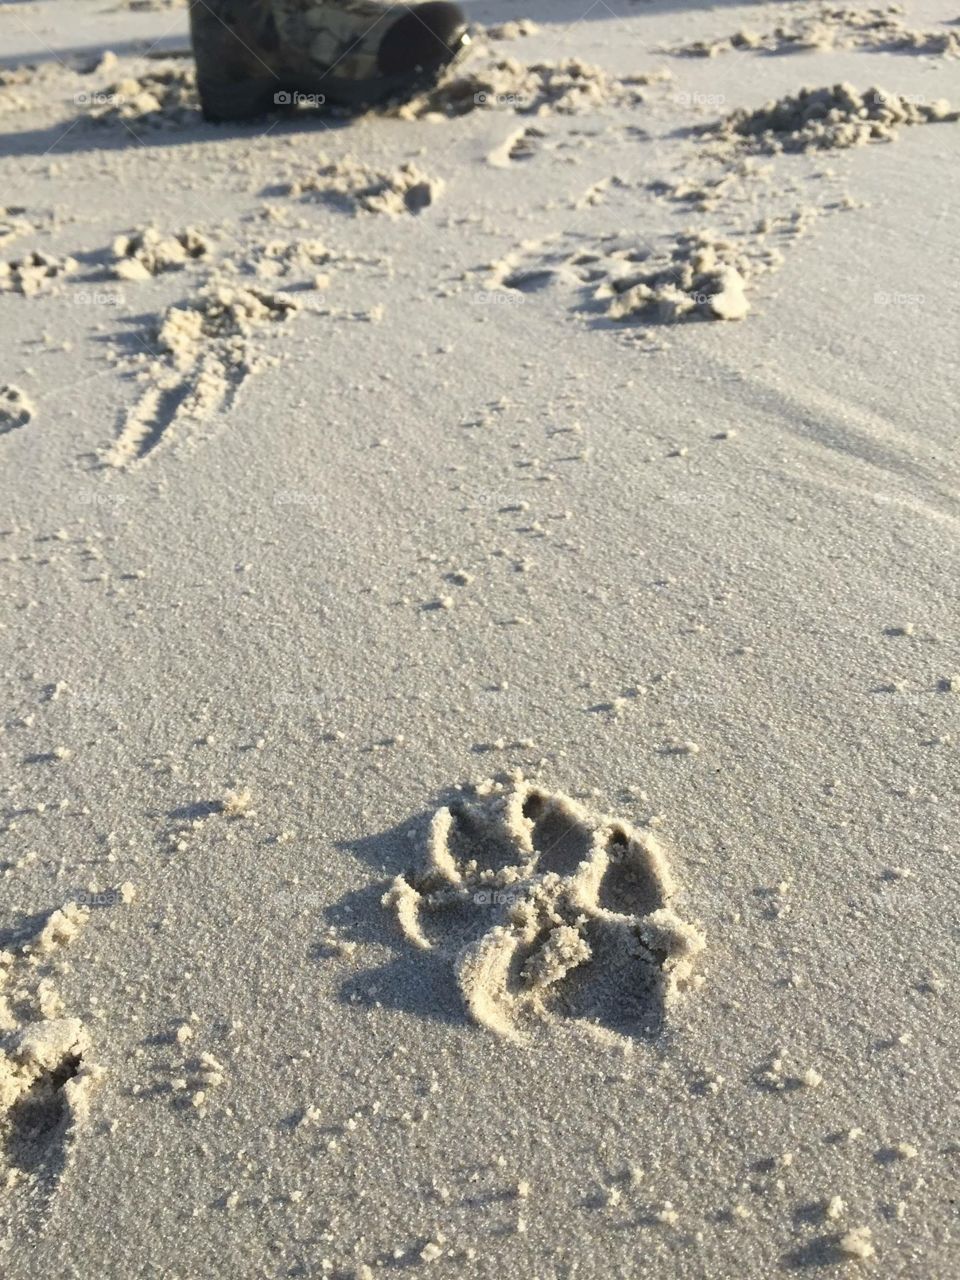 Dog prints in the sand.